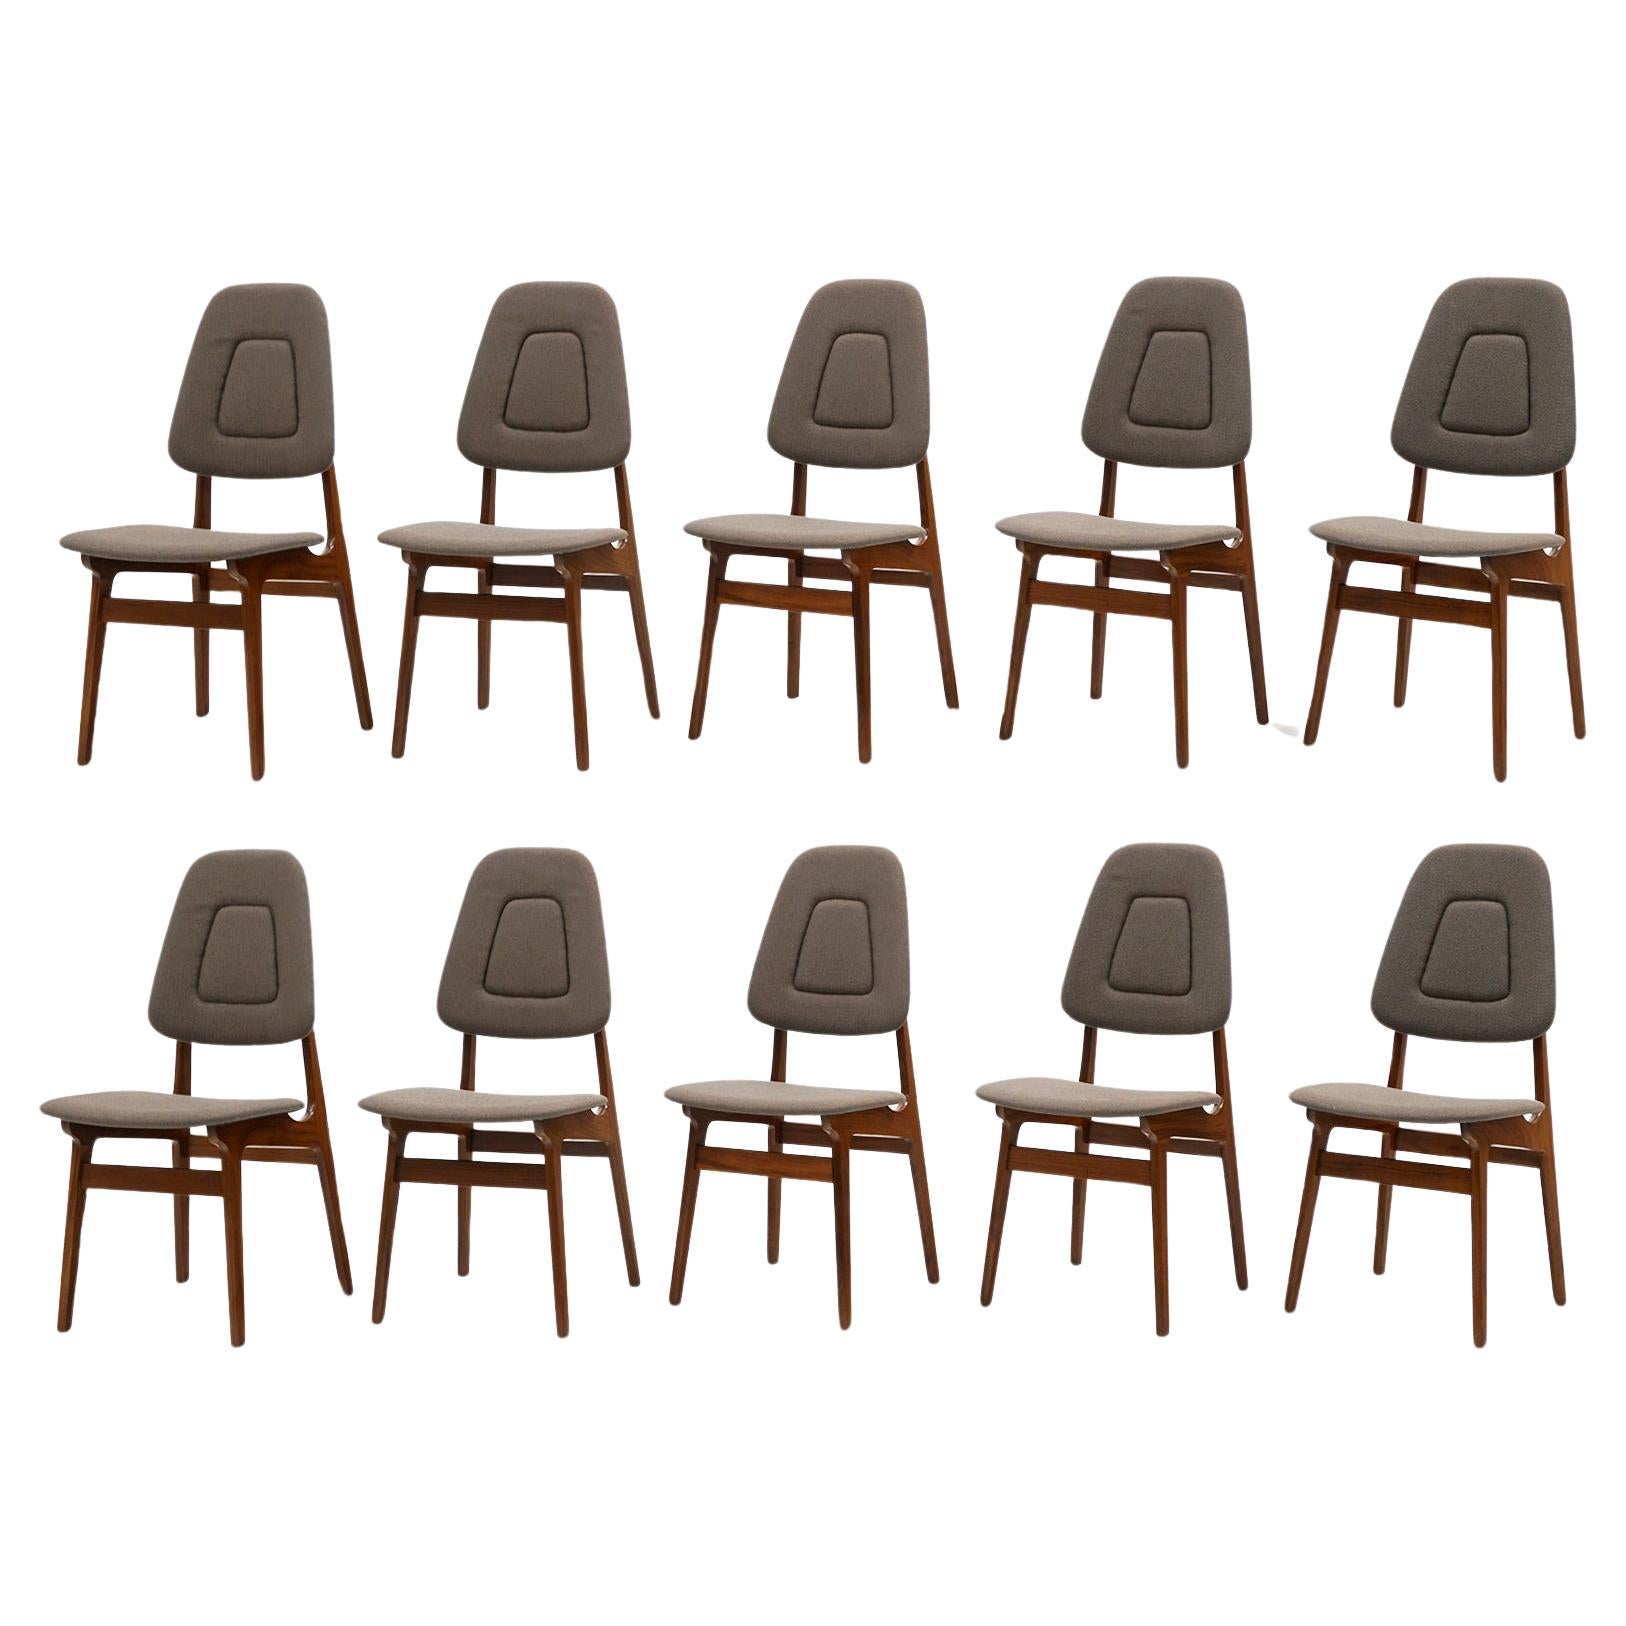 Ten HIgh Back Dining Chairs by Adrian Pearsall. Walnut with New Upholstery